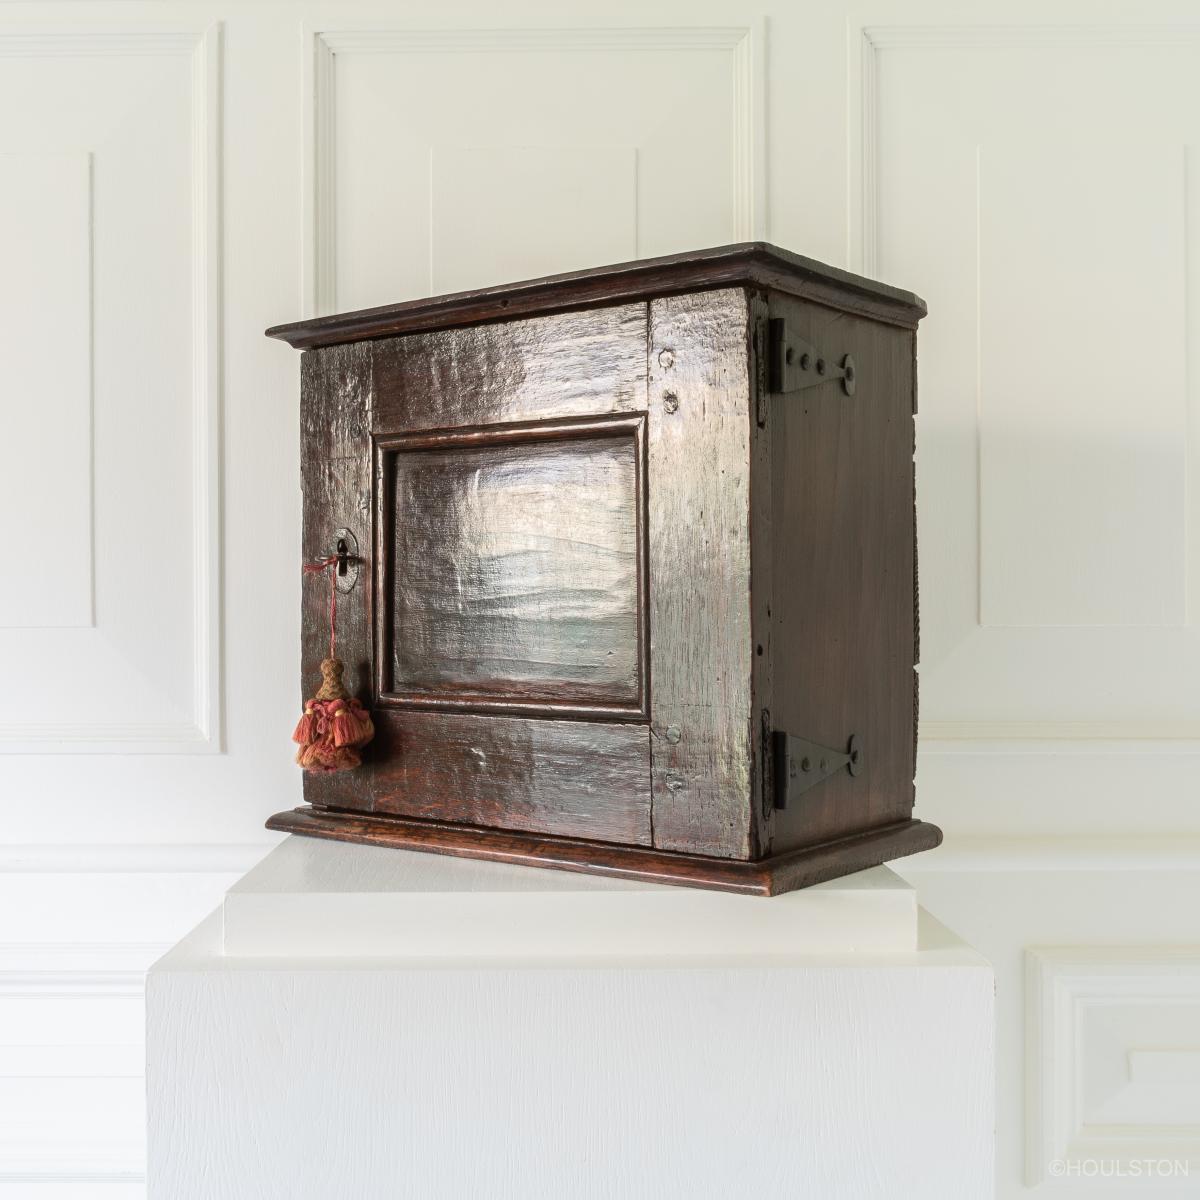 A small 17th century oak and elm spice cupboard